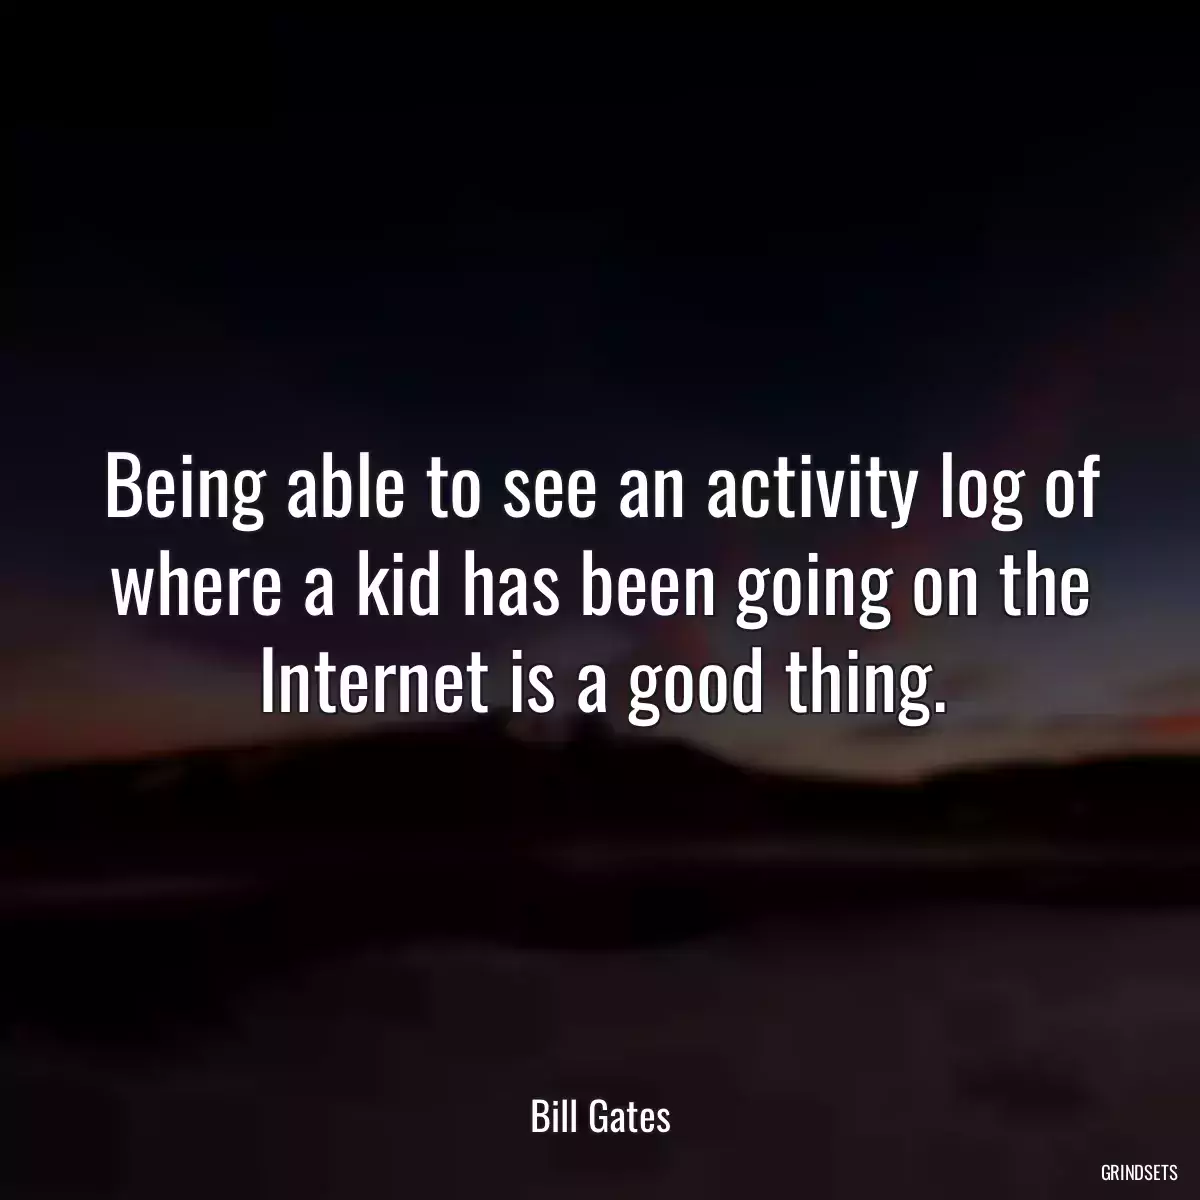 Being able to see an activity log of where a kid has been going on the Internet is a good thing.